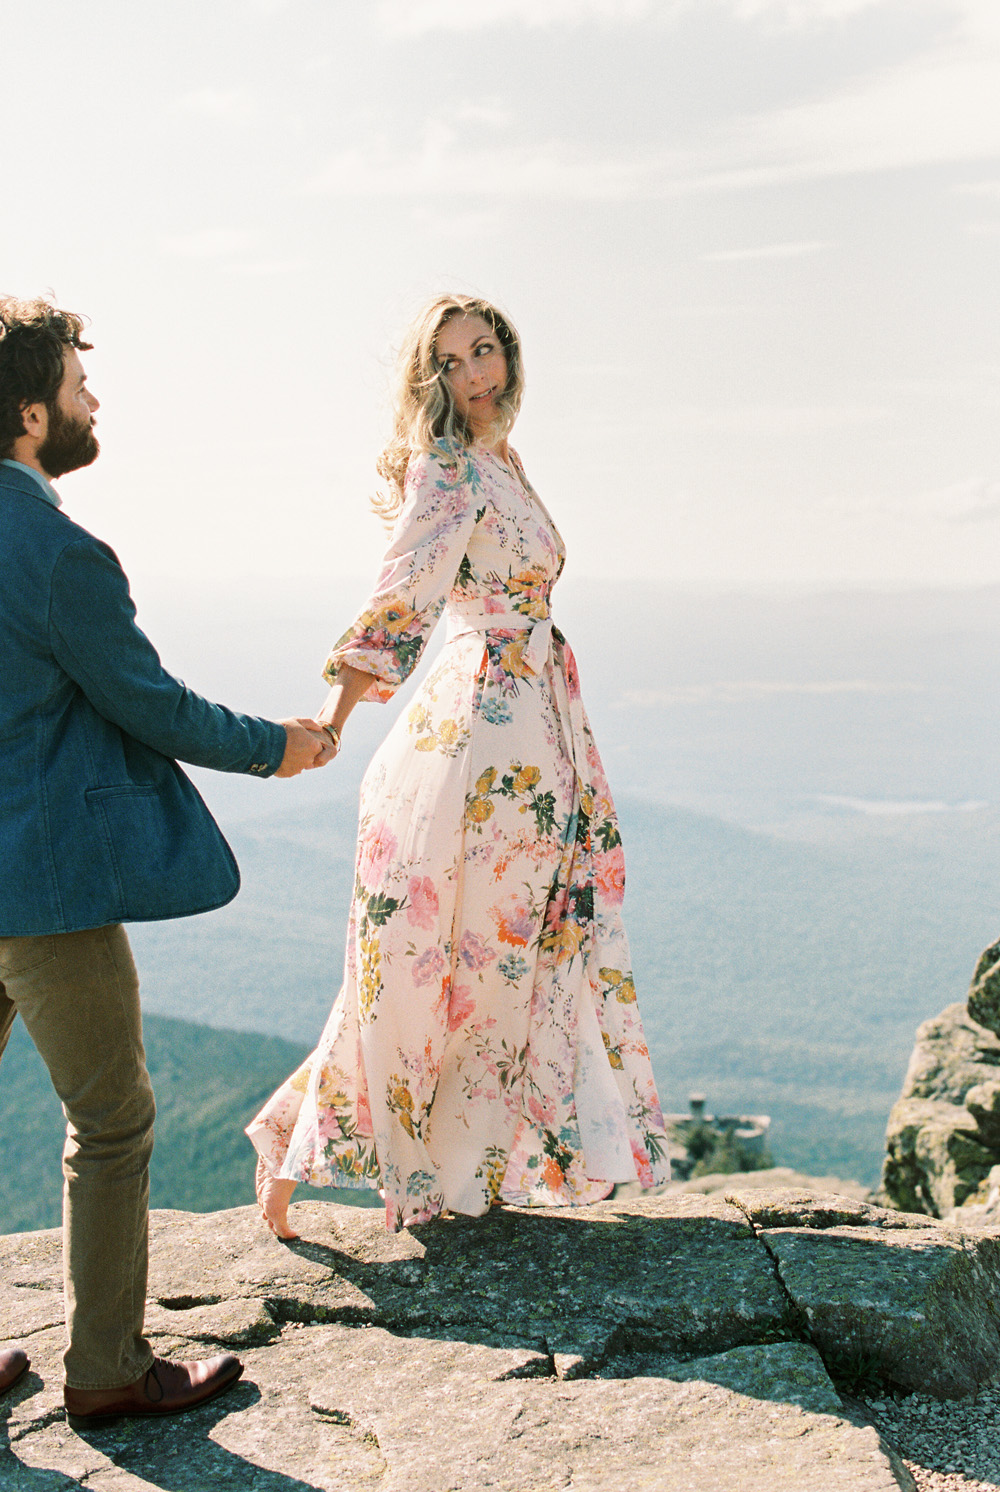 stone fruit studio | whiteface mountain film photography by Mary Dougherty